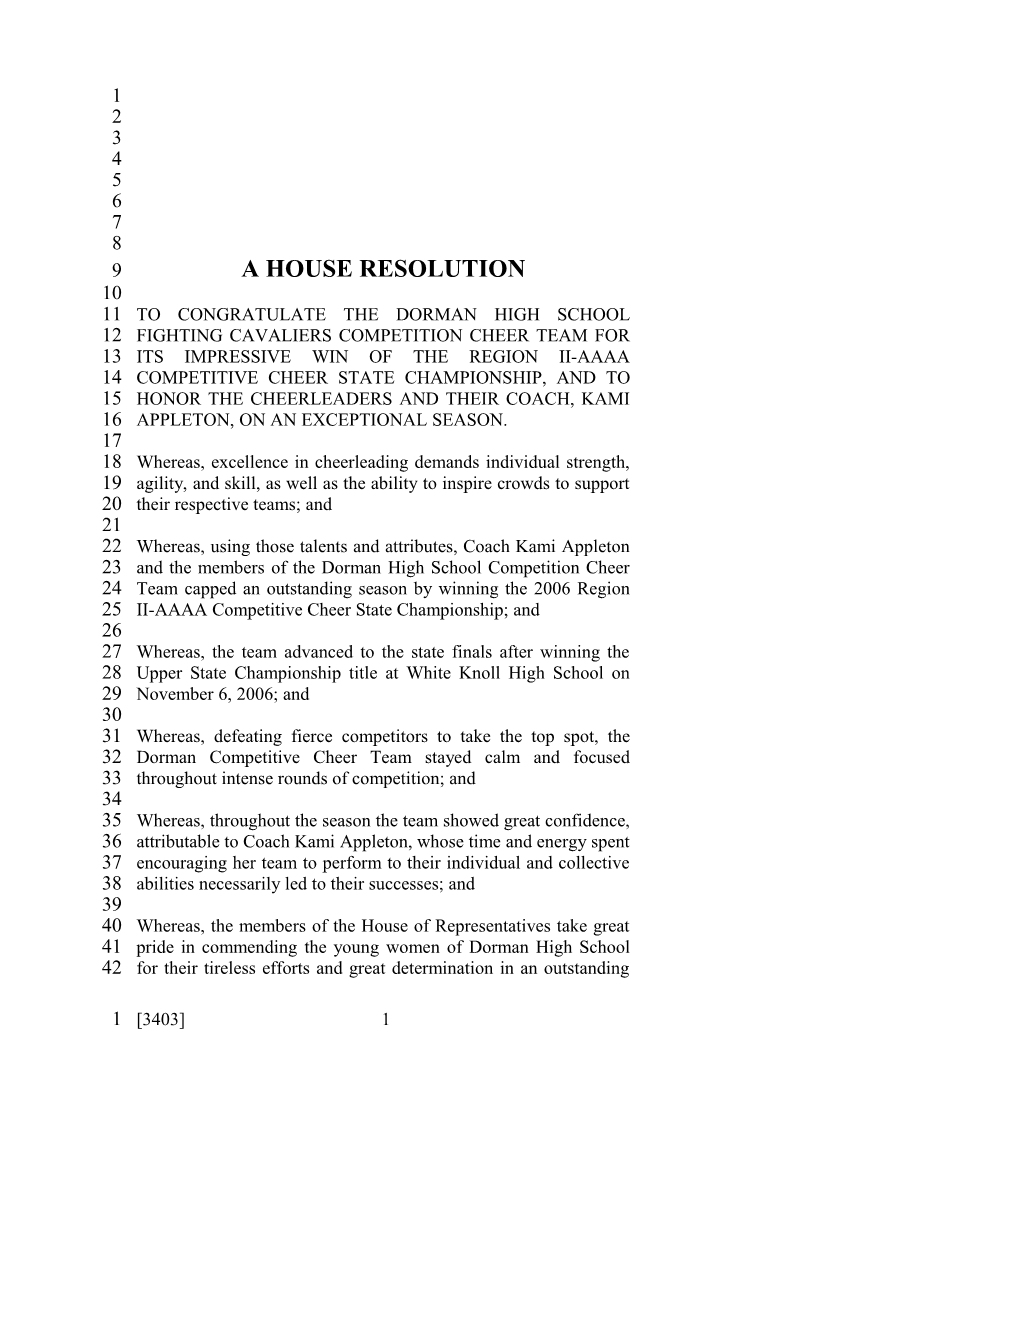 A House Resolution s1